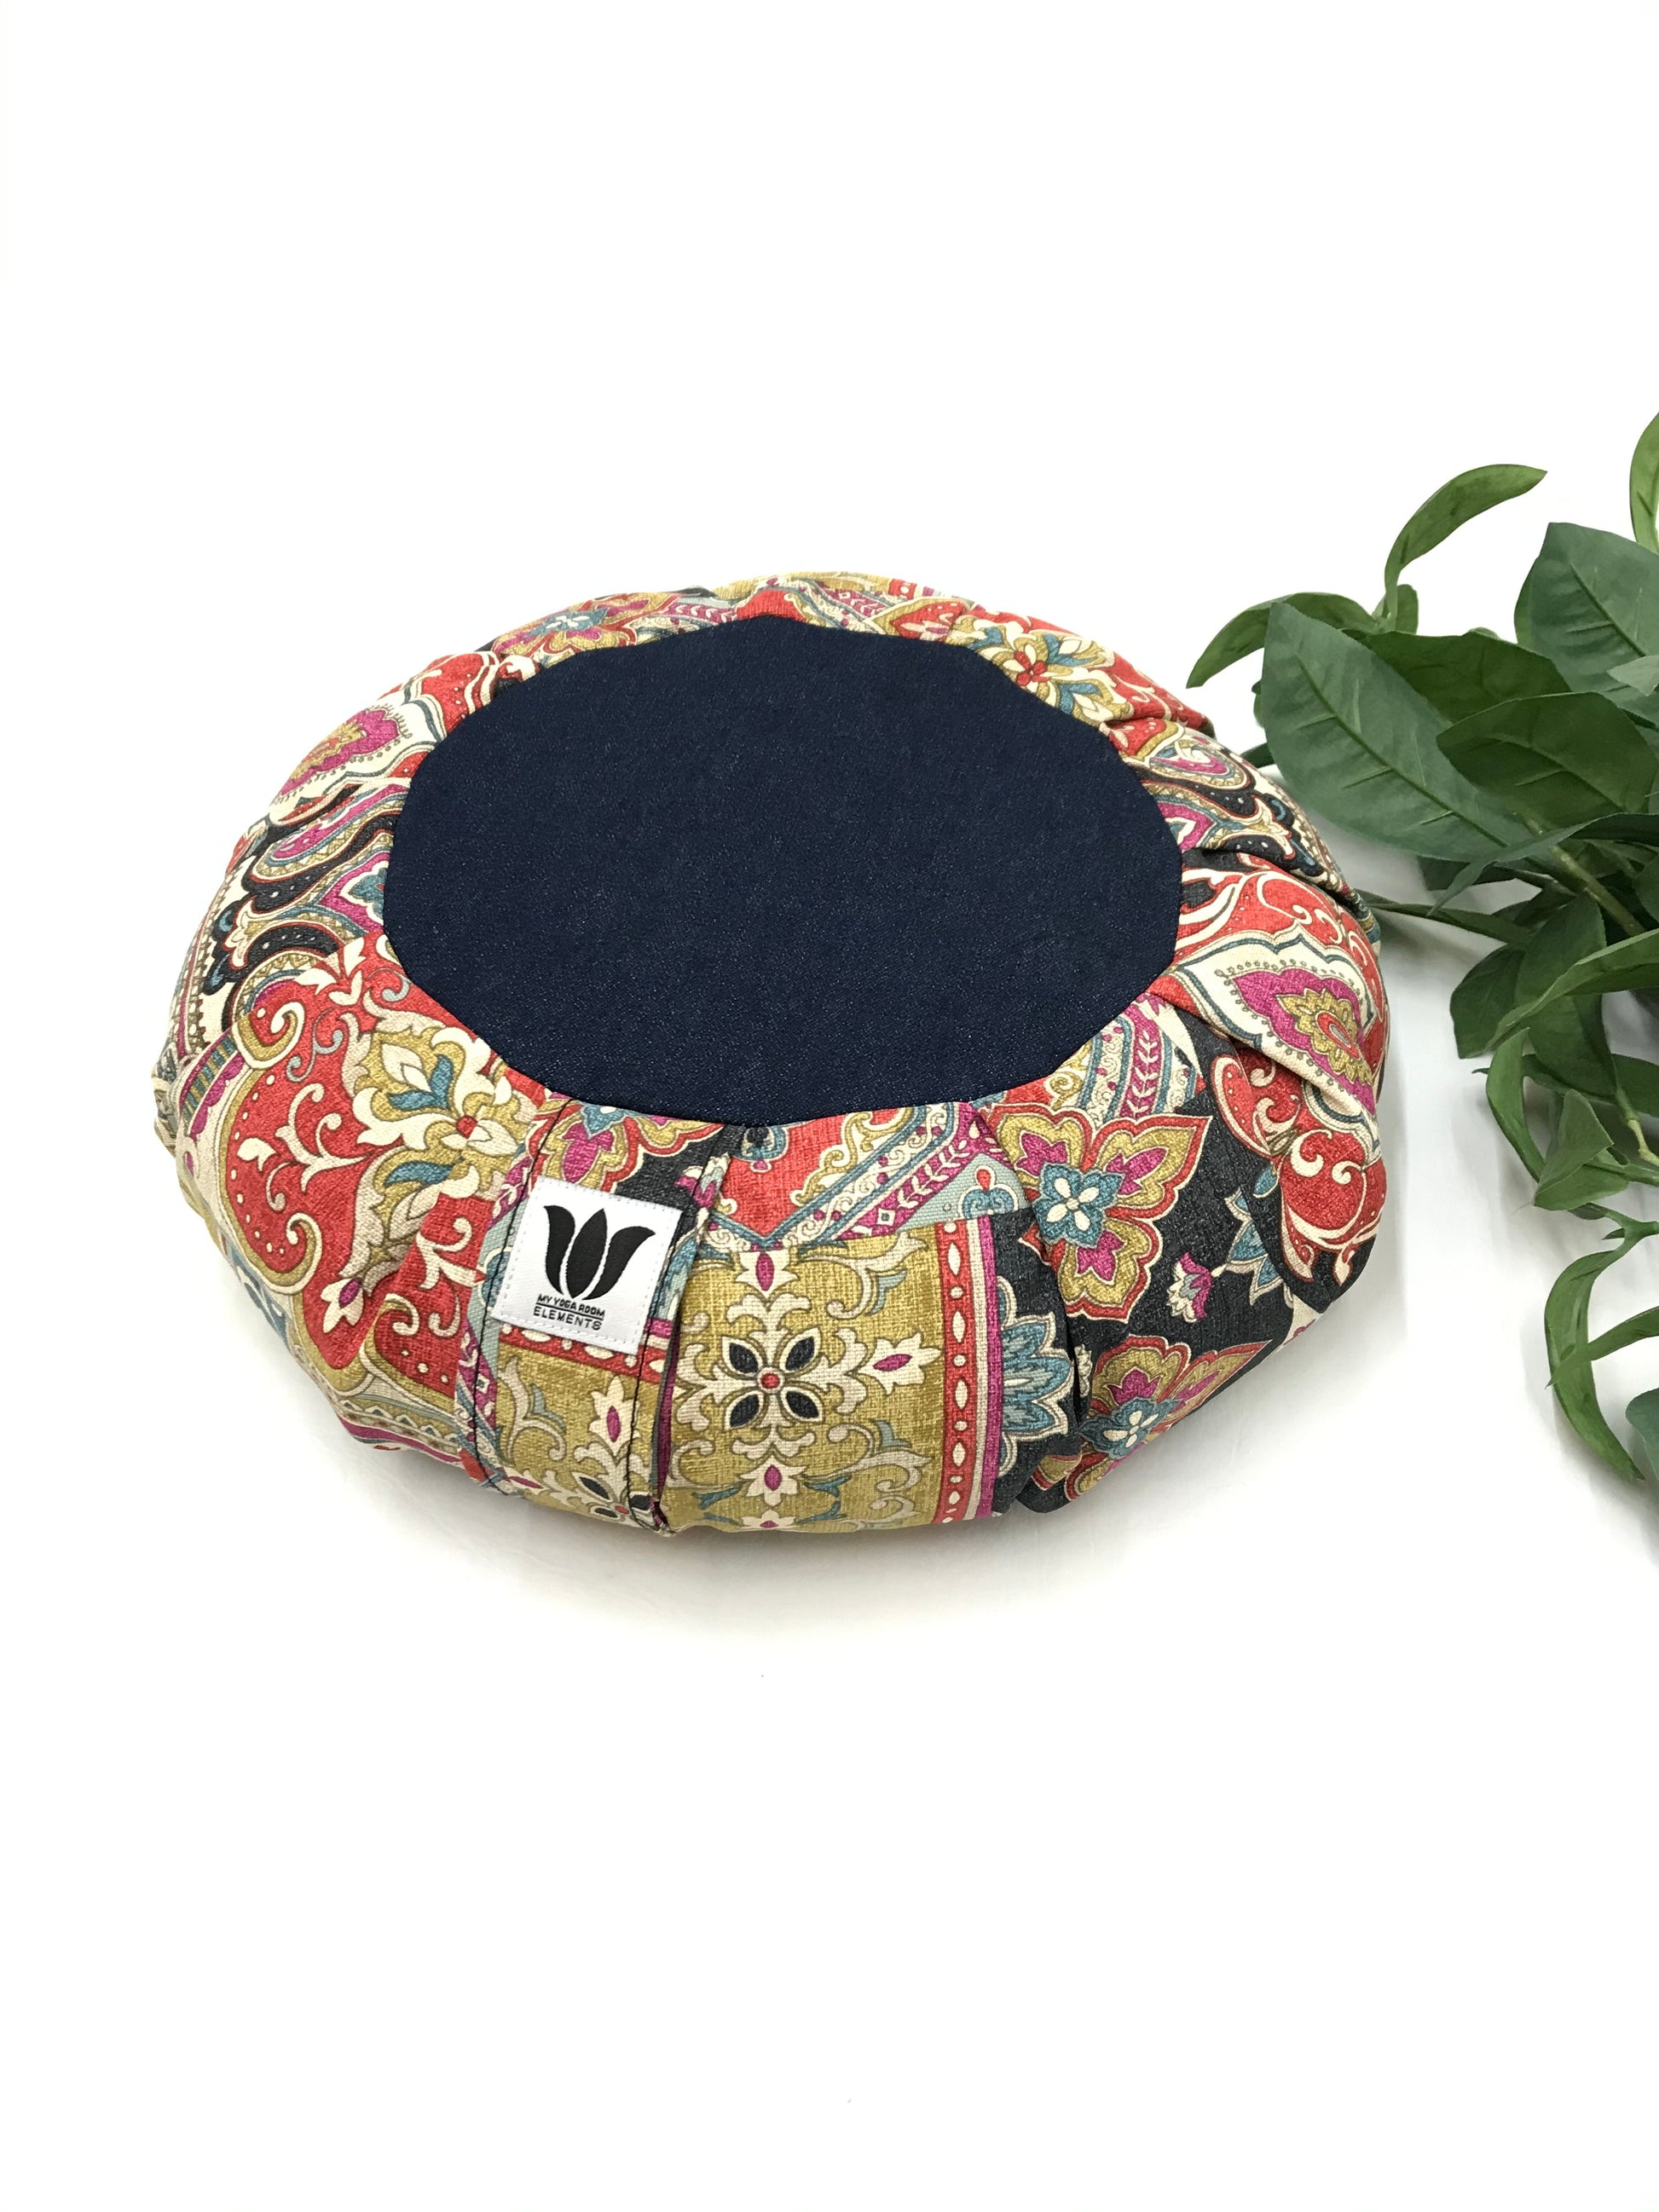 Handcrafted premium cotton canvas fabric meditation seat cushion in bright red boho print fabric.. Align the spine and body in comfort to calm the monkey mind in your meditation practice. Handcrafted in Calgary, Alberta Canada